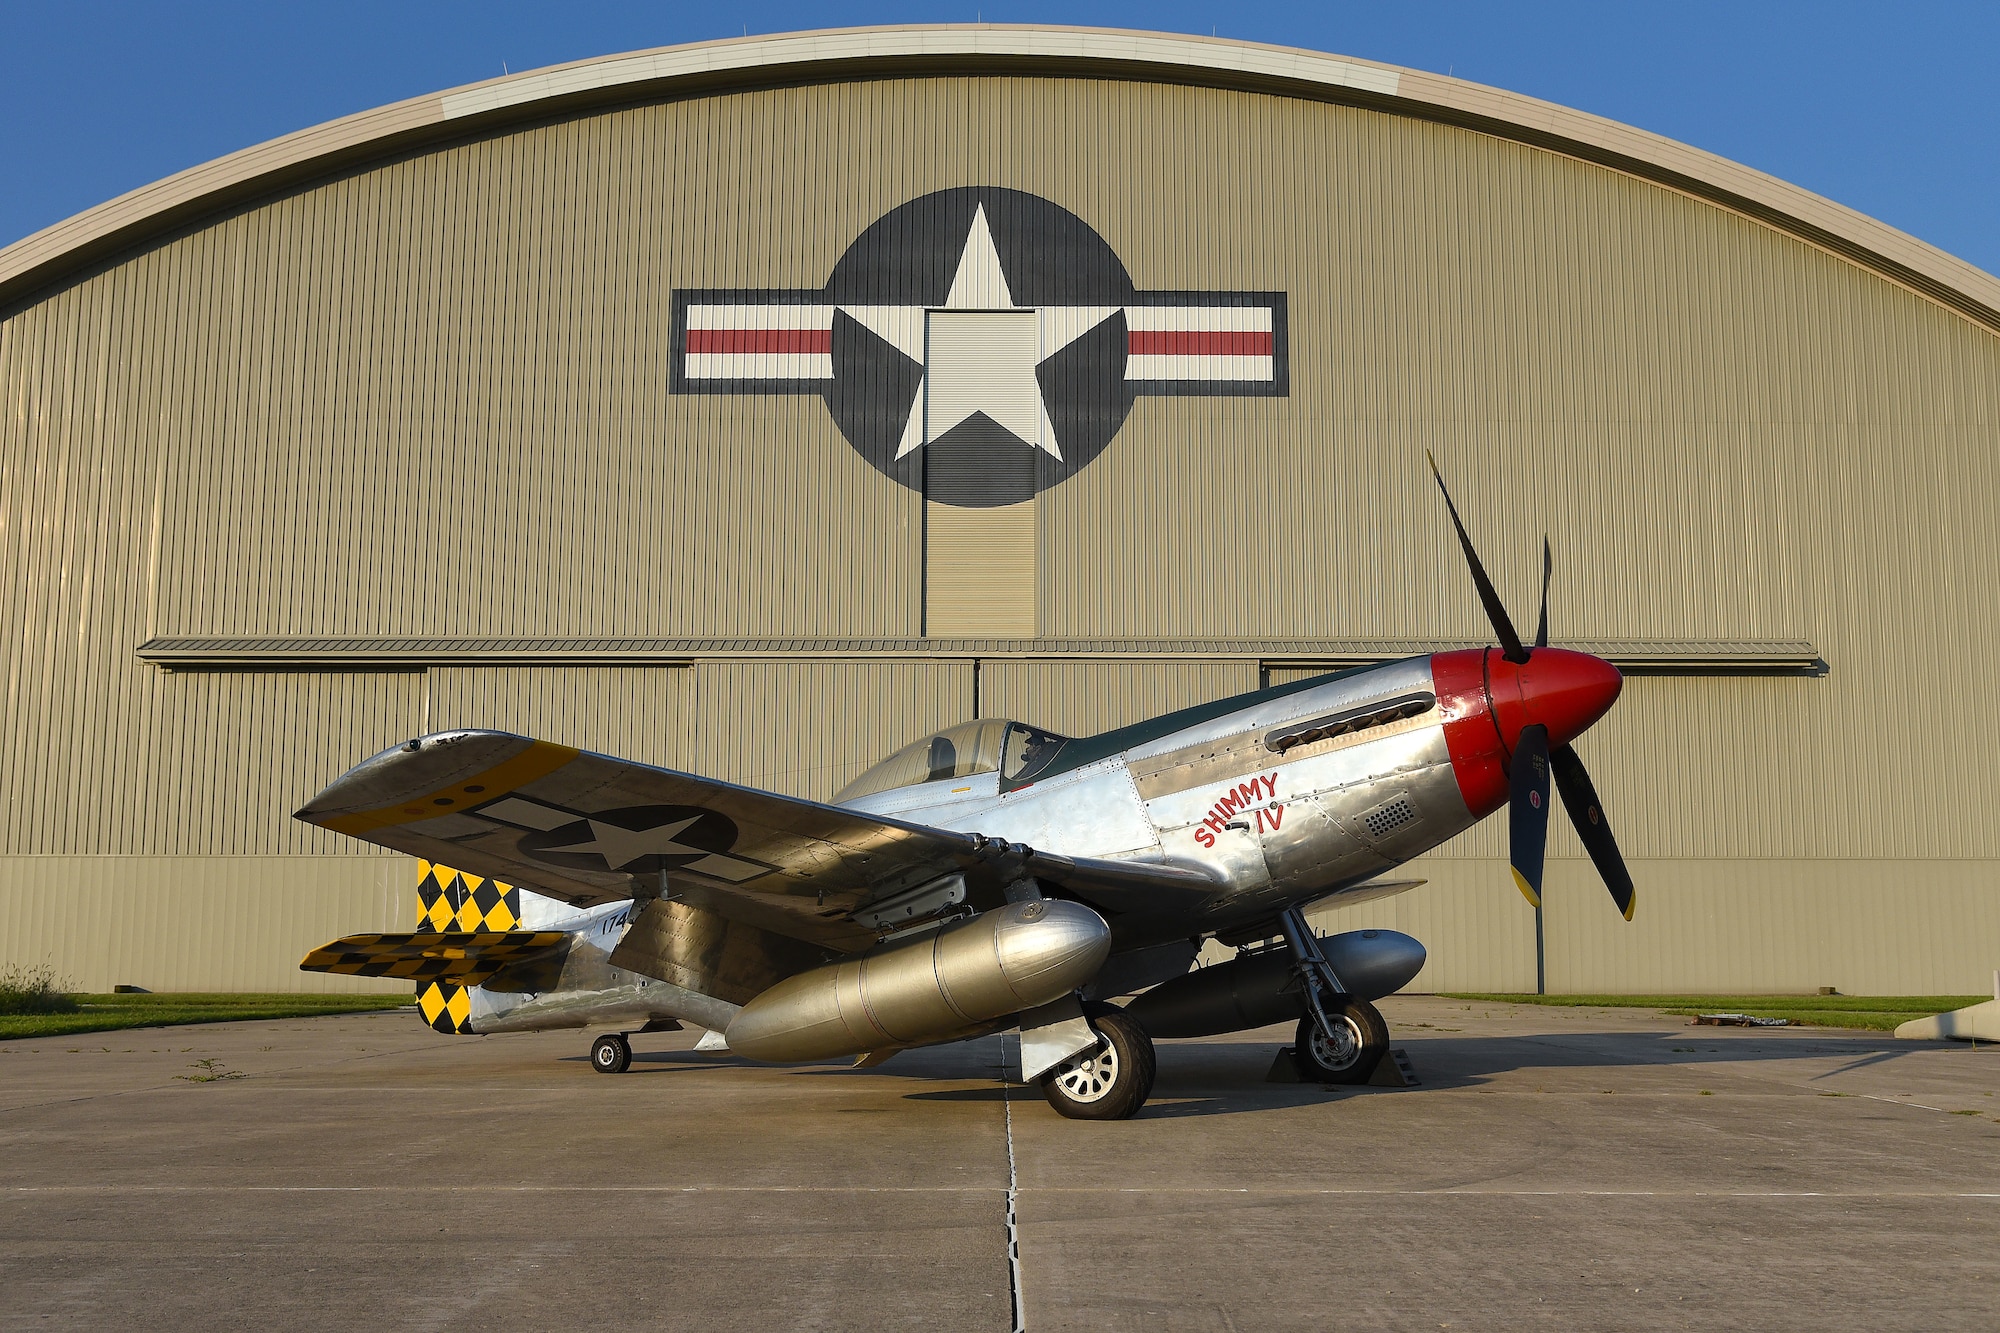 A view of the North American P-51D Mustang before restoration crews at the National Museum of the U.S. Air Force moved the aircraft into the WWII Gallery on Aug. 14, 2018. Several WWII era aircraft on display were temporarily placed throughout the museum to provide adequate space for the Memphis Belle exhibit opening events. (U.S. Air Force photo by Ken LaRock)